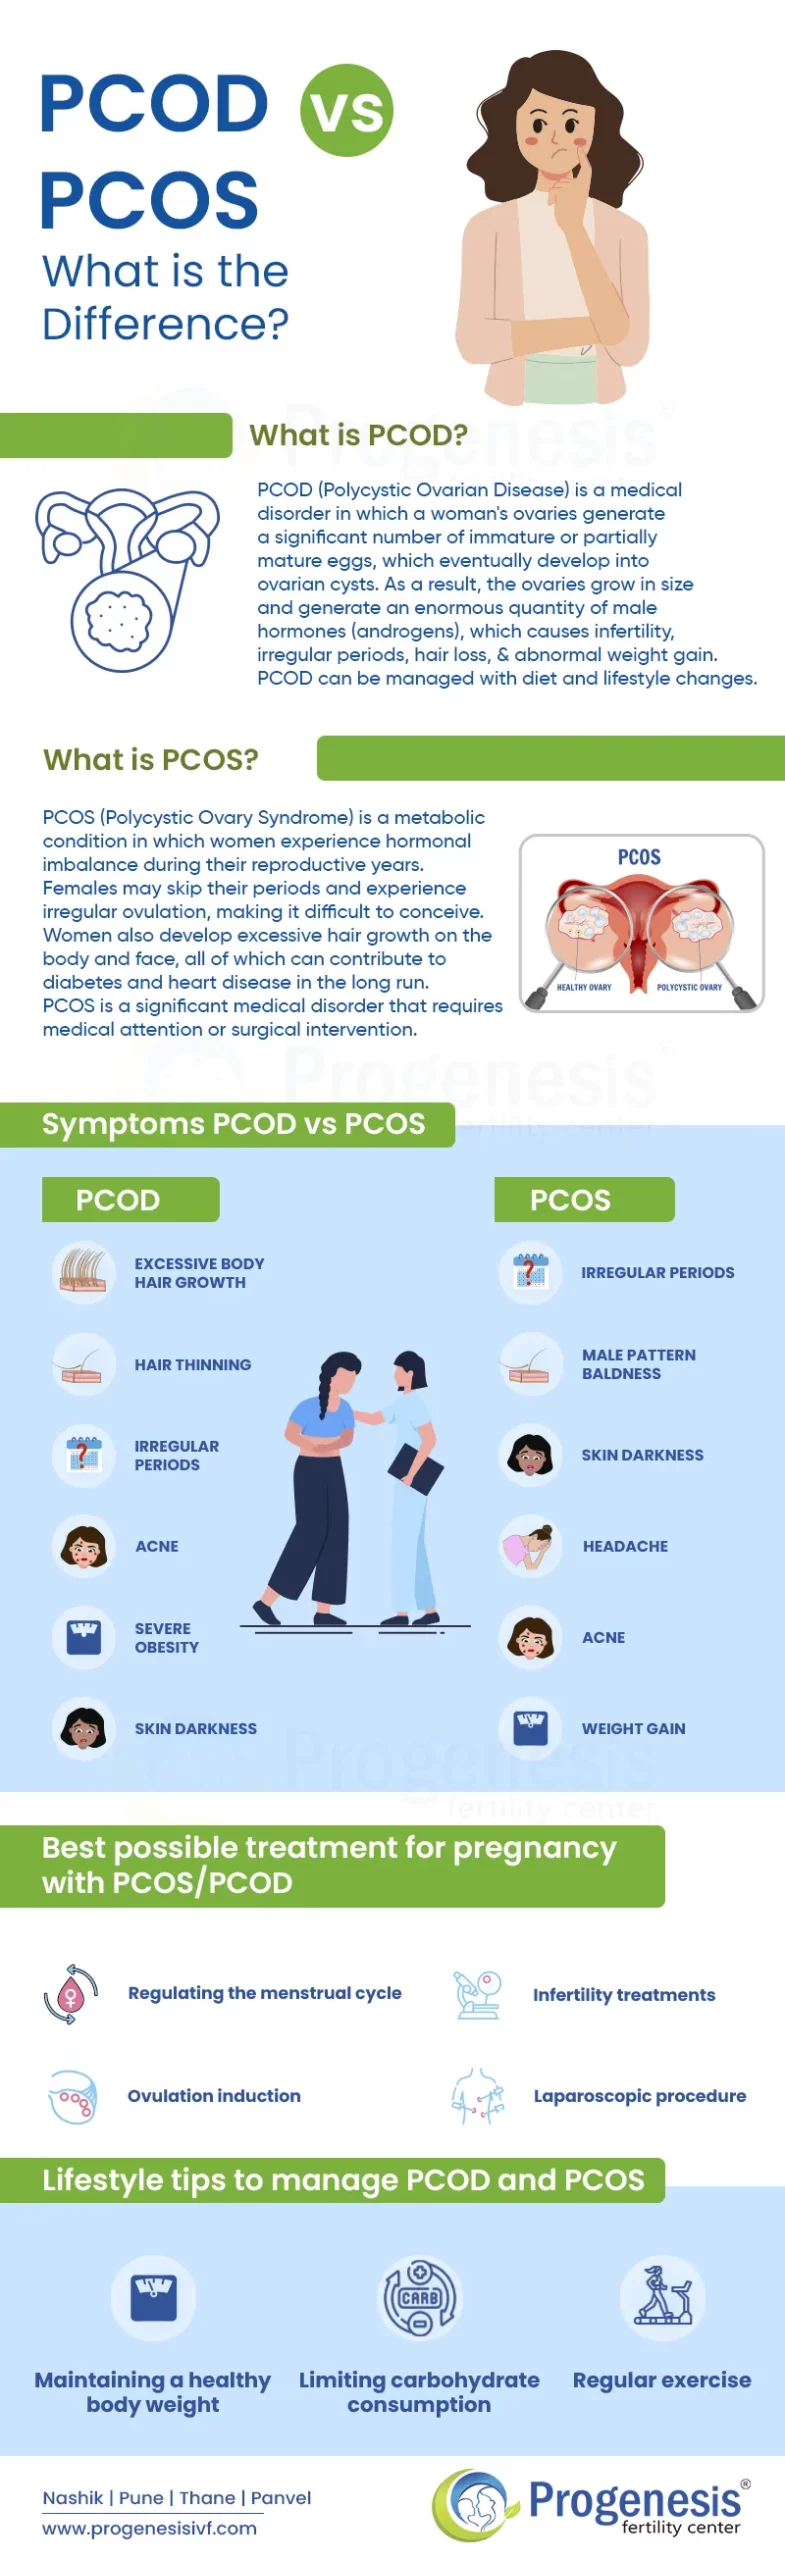 Symptoms of PCOD and PCOS